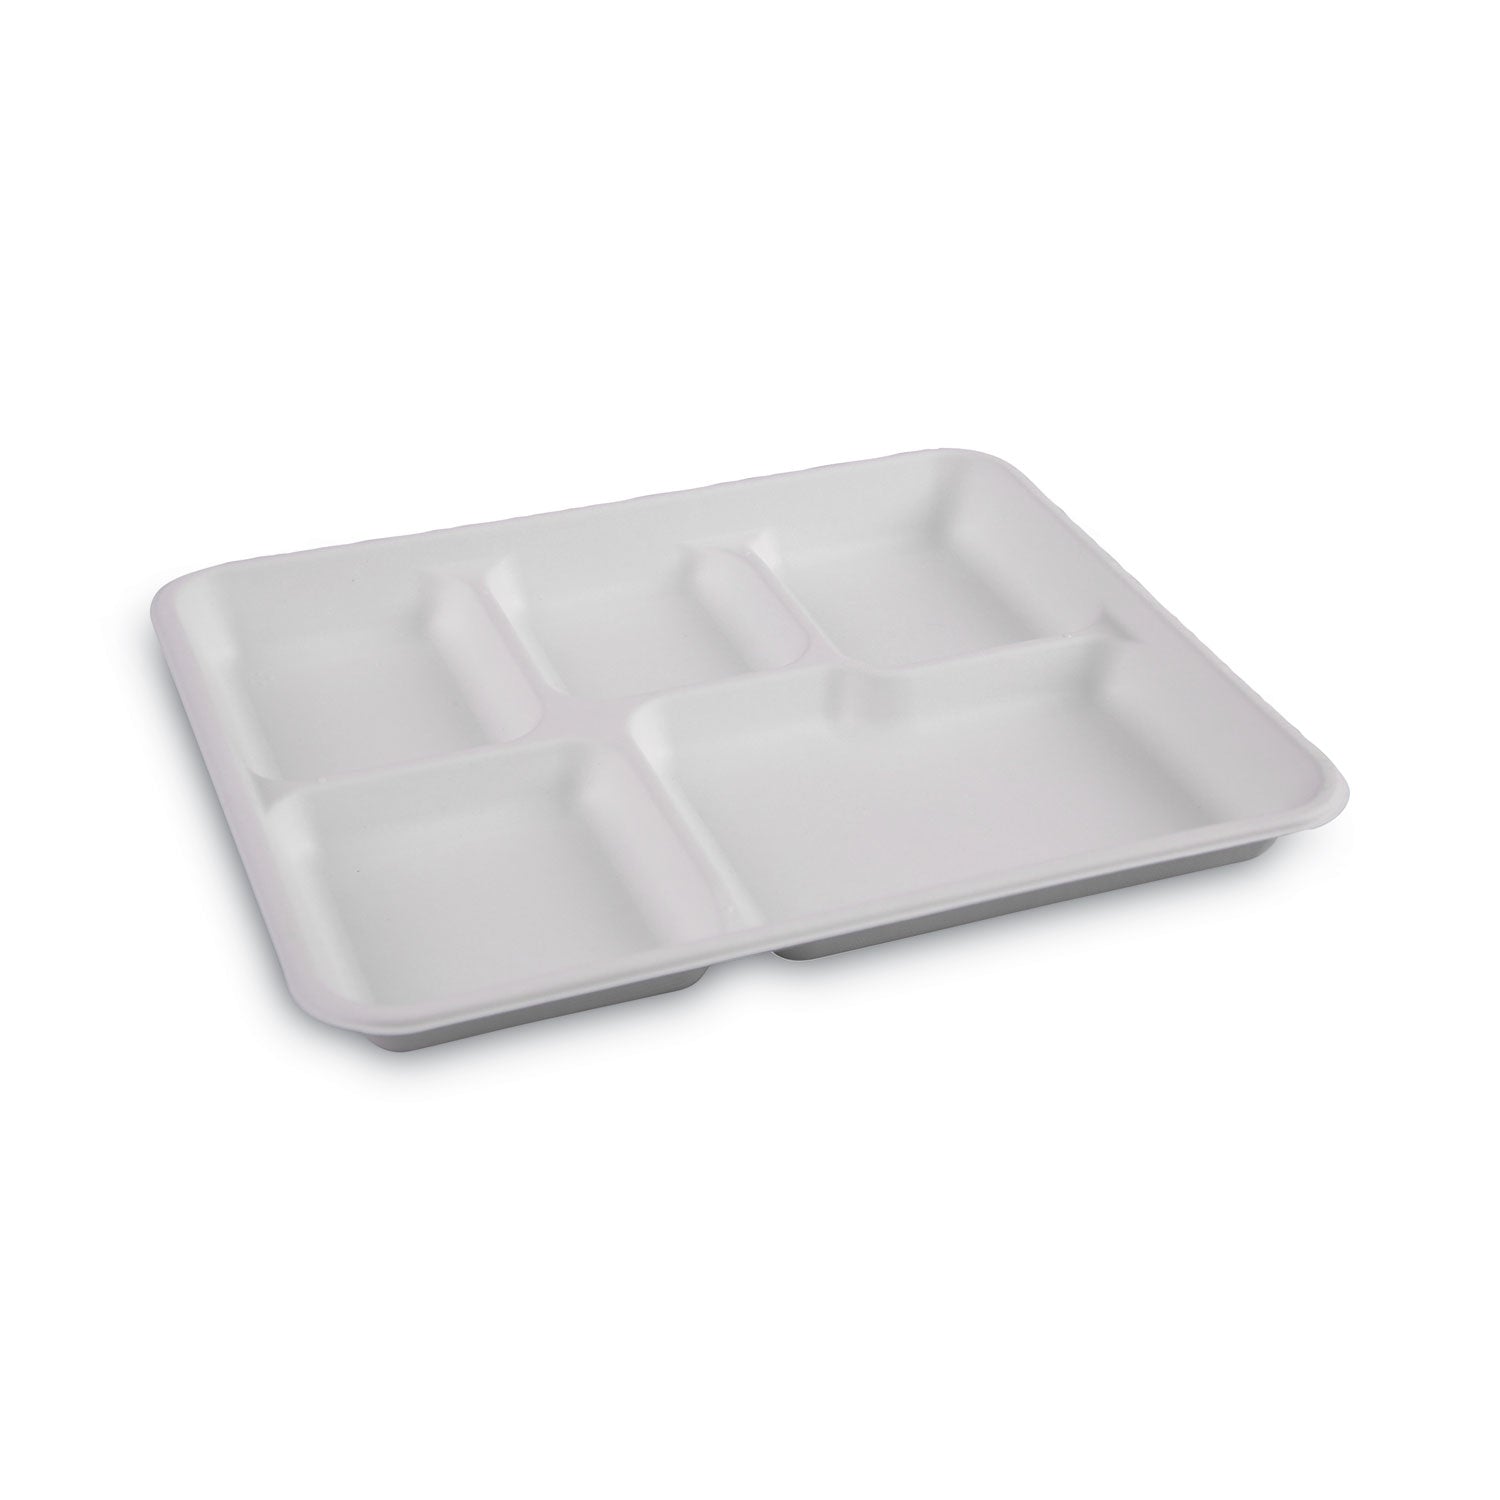 bagasse-dinnerware-5-compartment-tray-10-x-8-white-500-carton_bwktraywf128 - 3